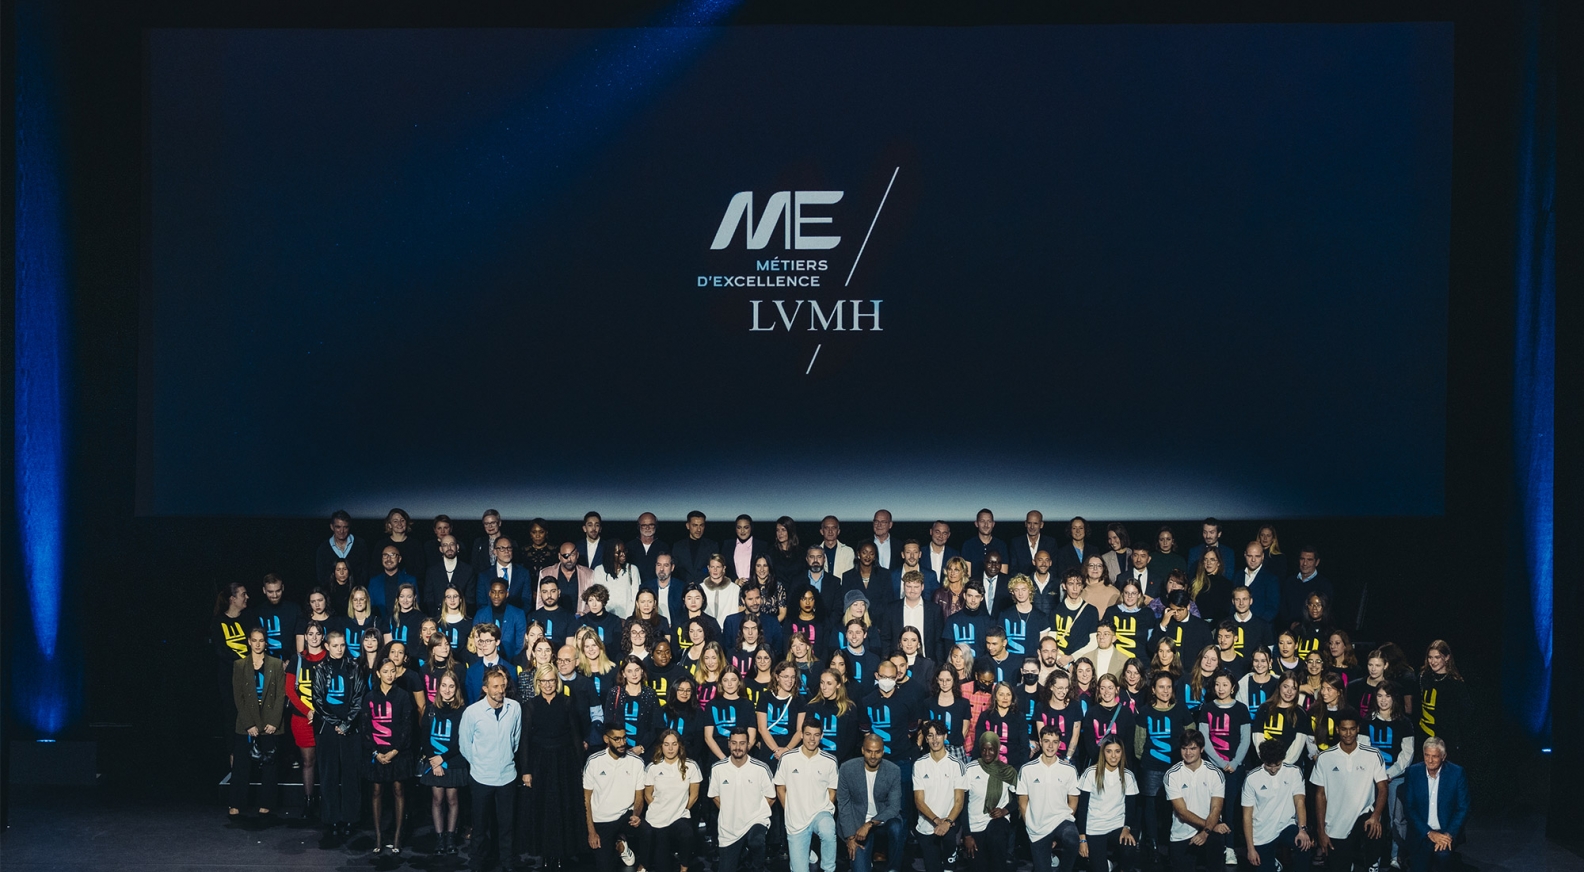 LVMH continues to promote and preserve the Métiers d'Excellence to pass on  unique savoir-faire in France - LVMH